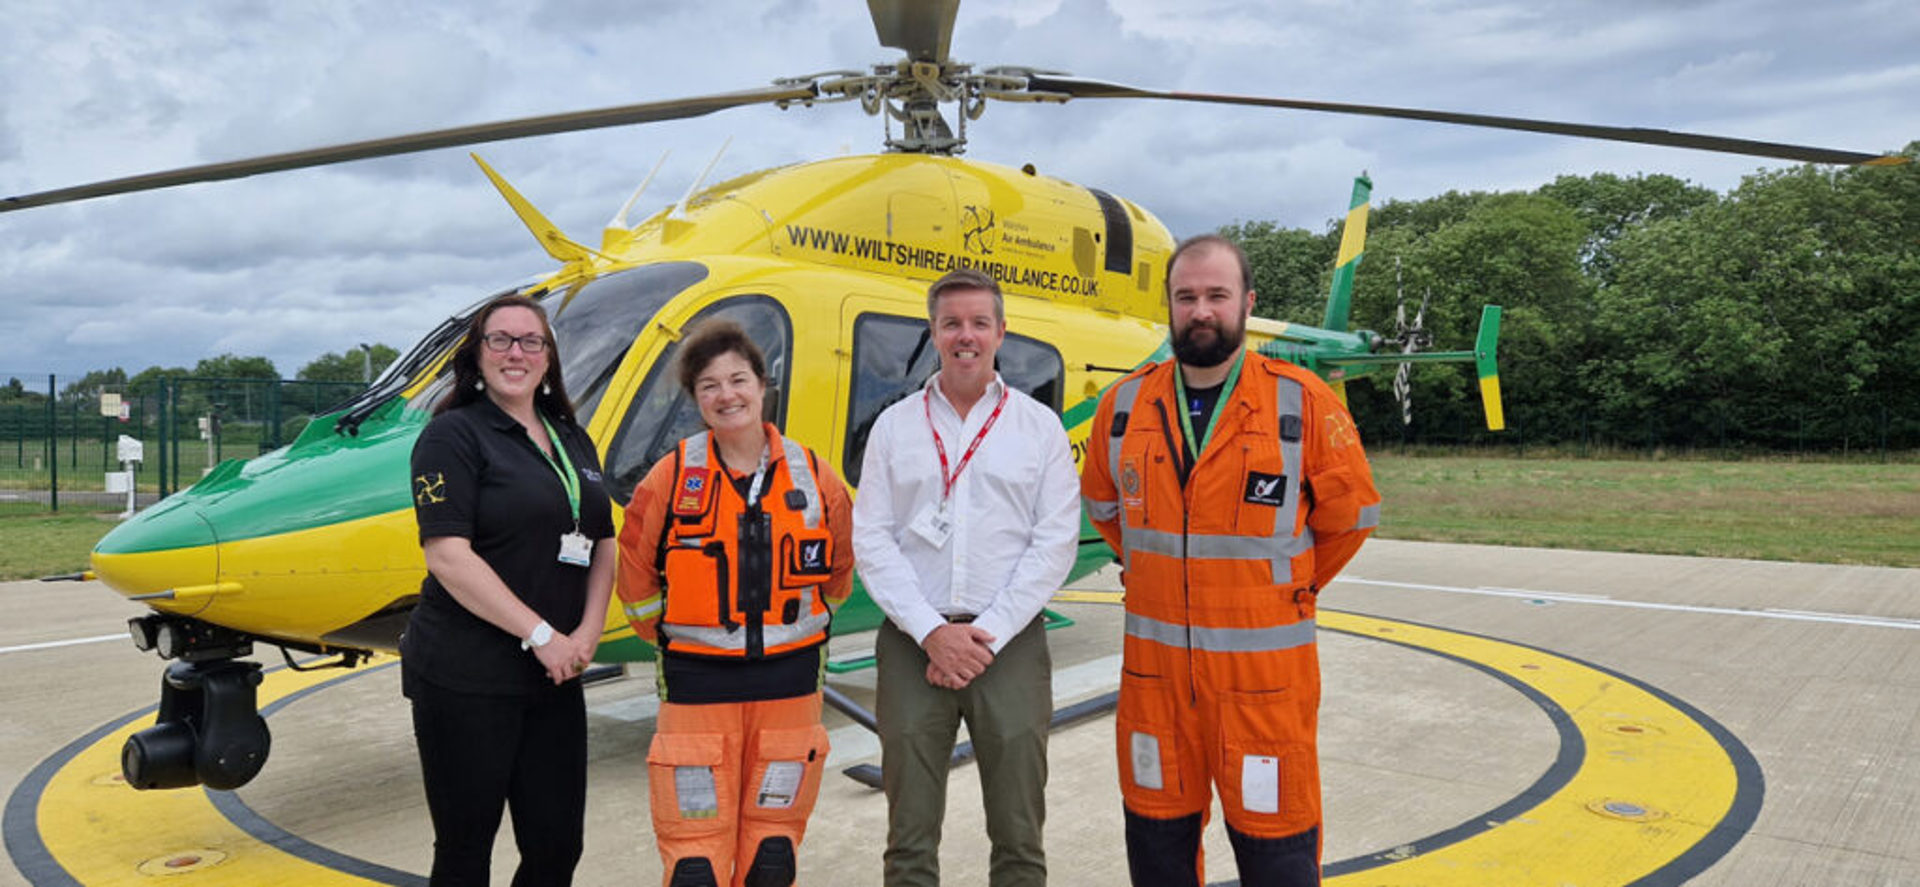 A member from Goodman Nash in front of wiltshire air ambulance's helicopter, with two paramedics and a charity team member